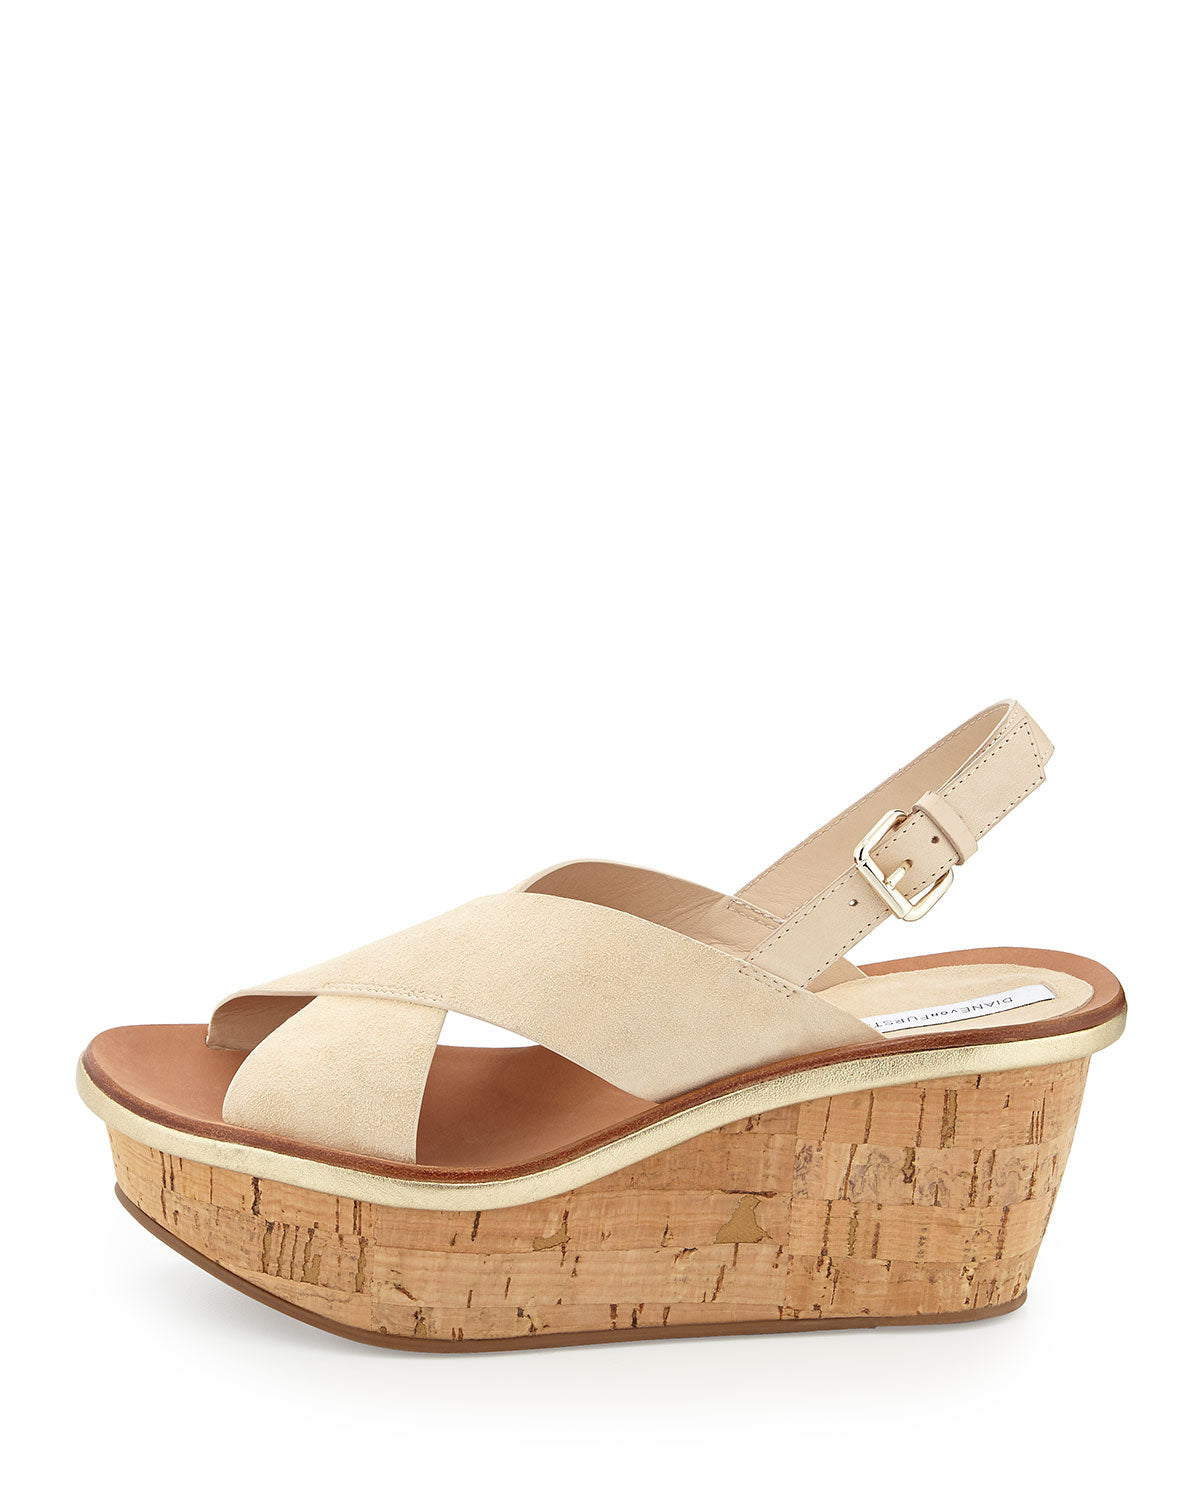 DVF Womens Maven Nude Suede Wedge Sandal